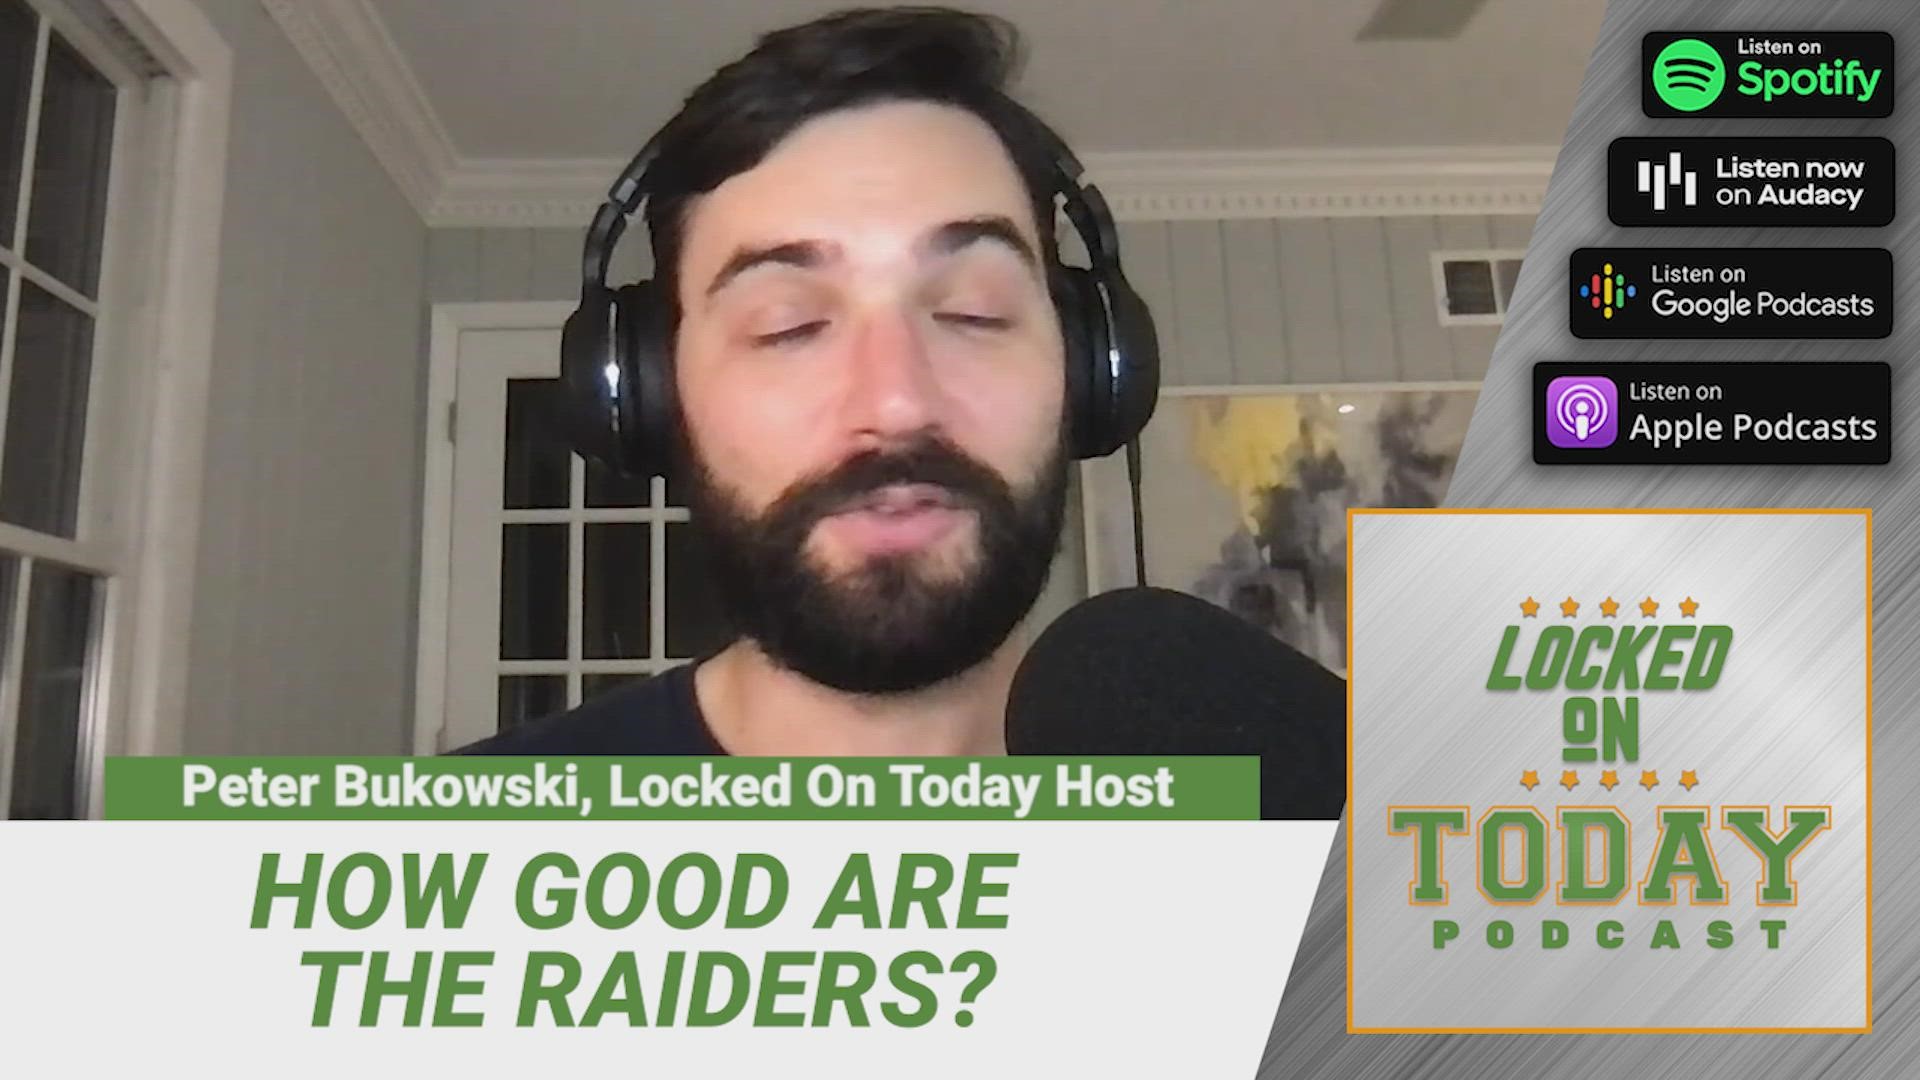 The Las Vegas Raiders are 2-0, defeating the Ravens and the Steelers in the first two weeks. What's different about them this year?